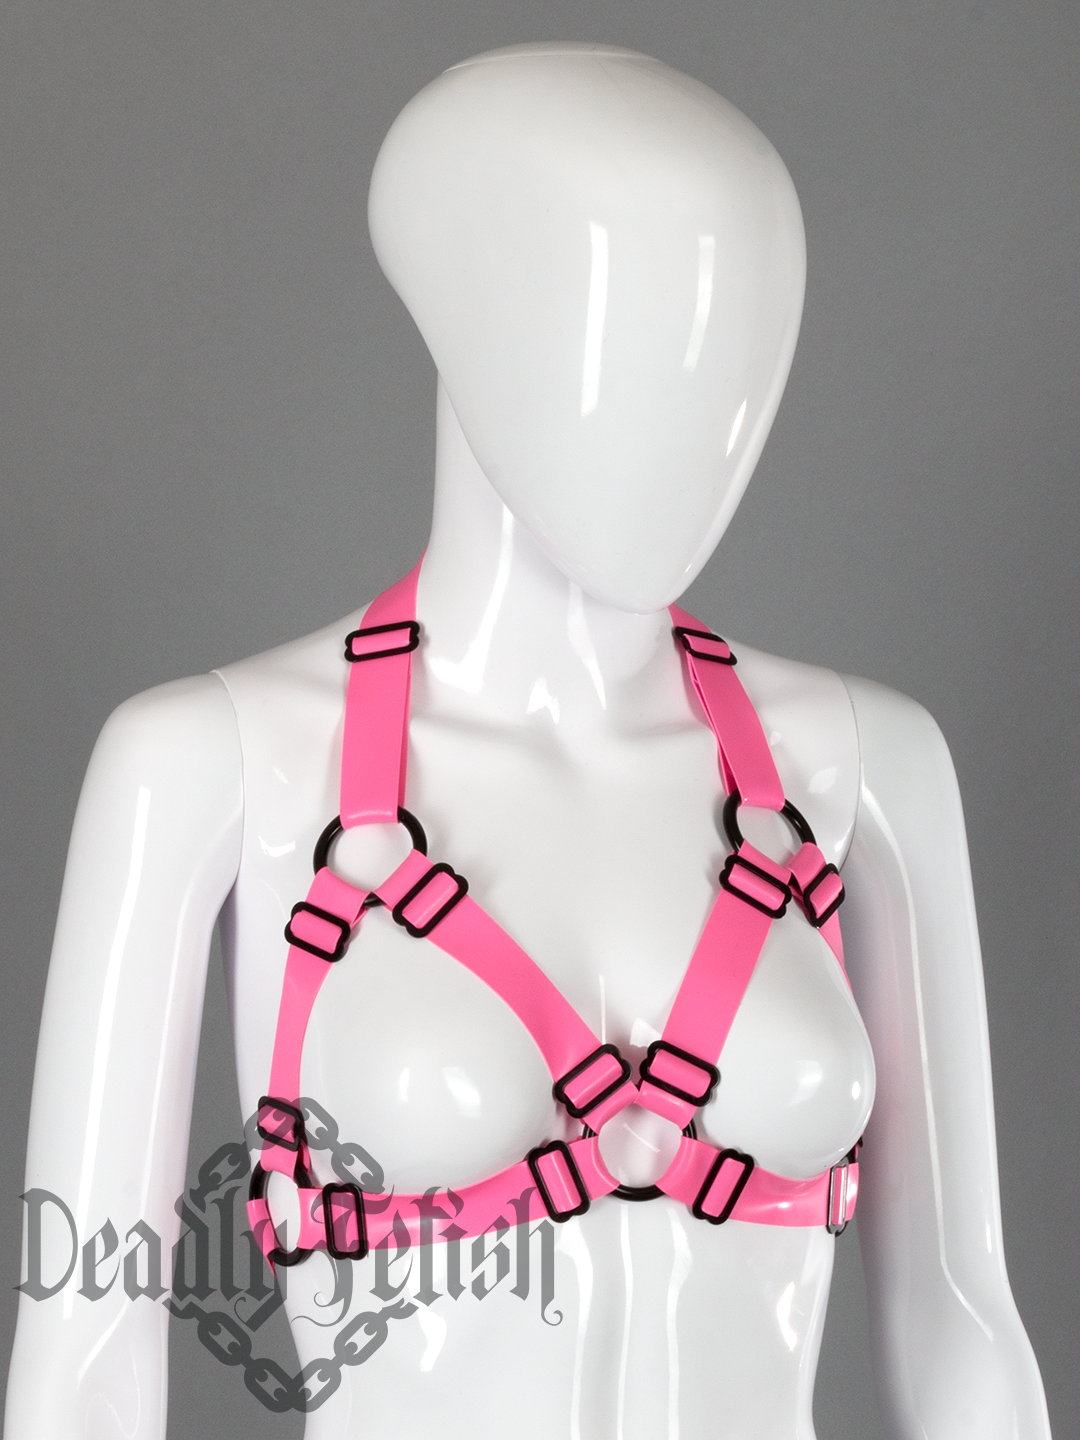 Deadly Fetish Made-to-Order Latex: Basic Harness #10